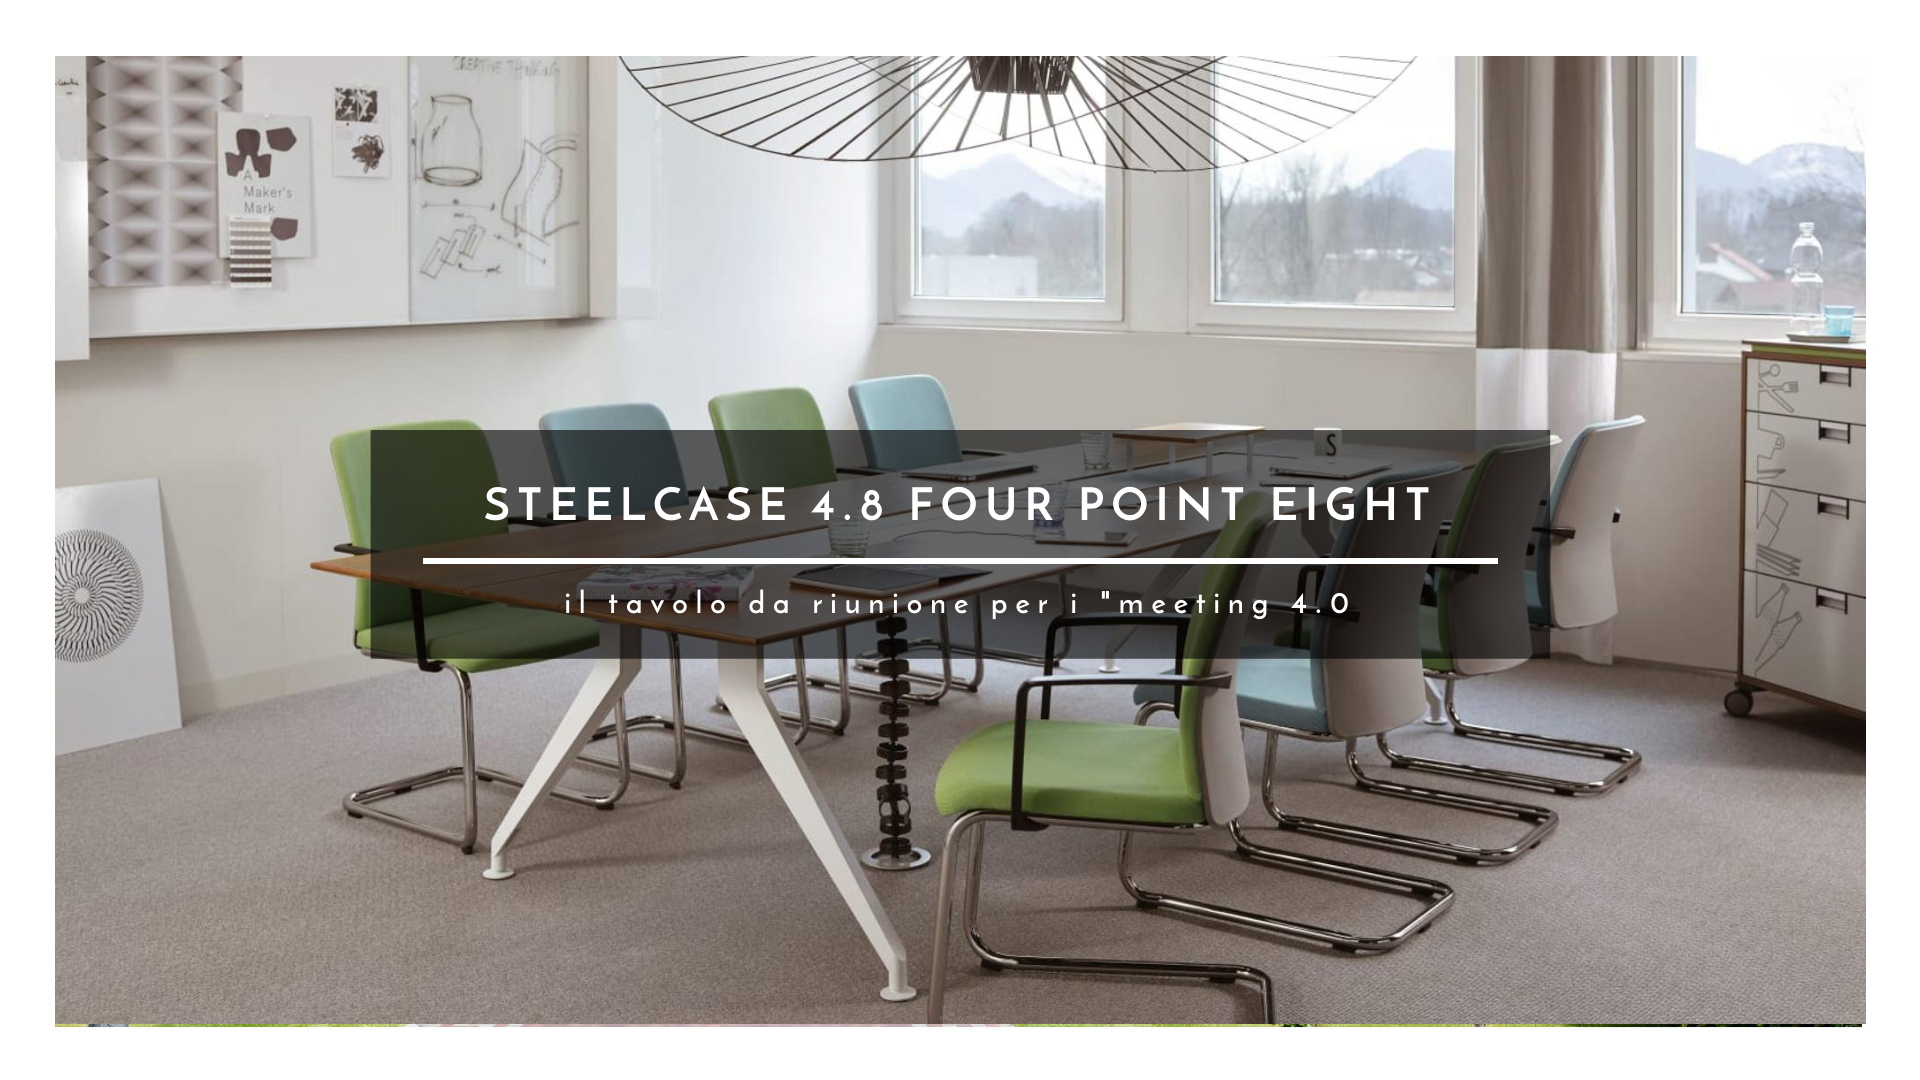 Steelcase 4.8 Four point eight